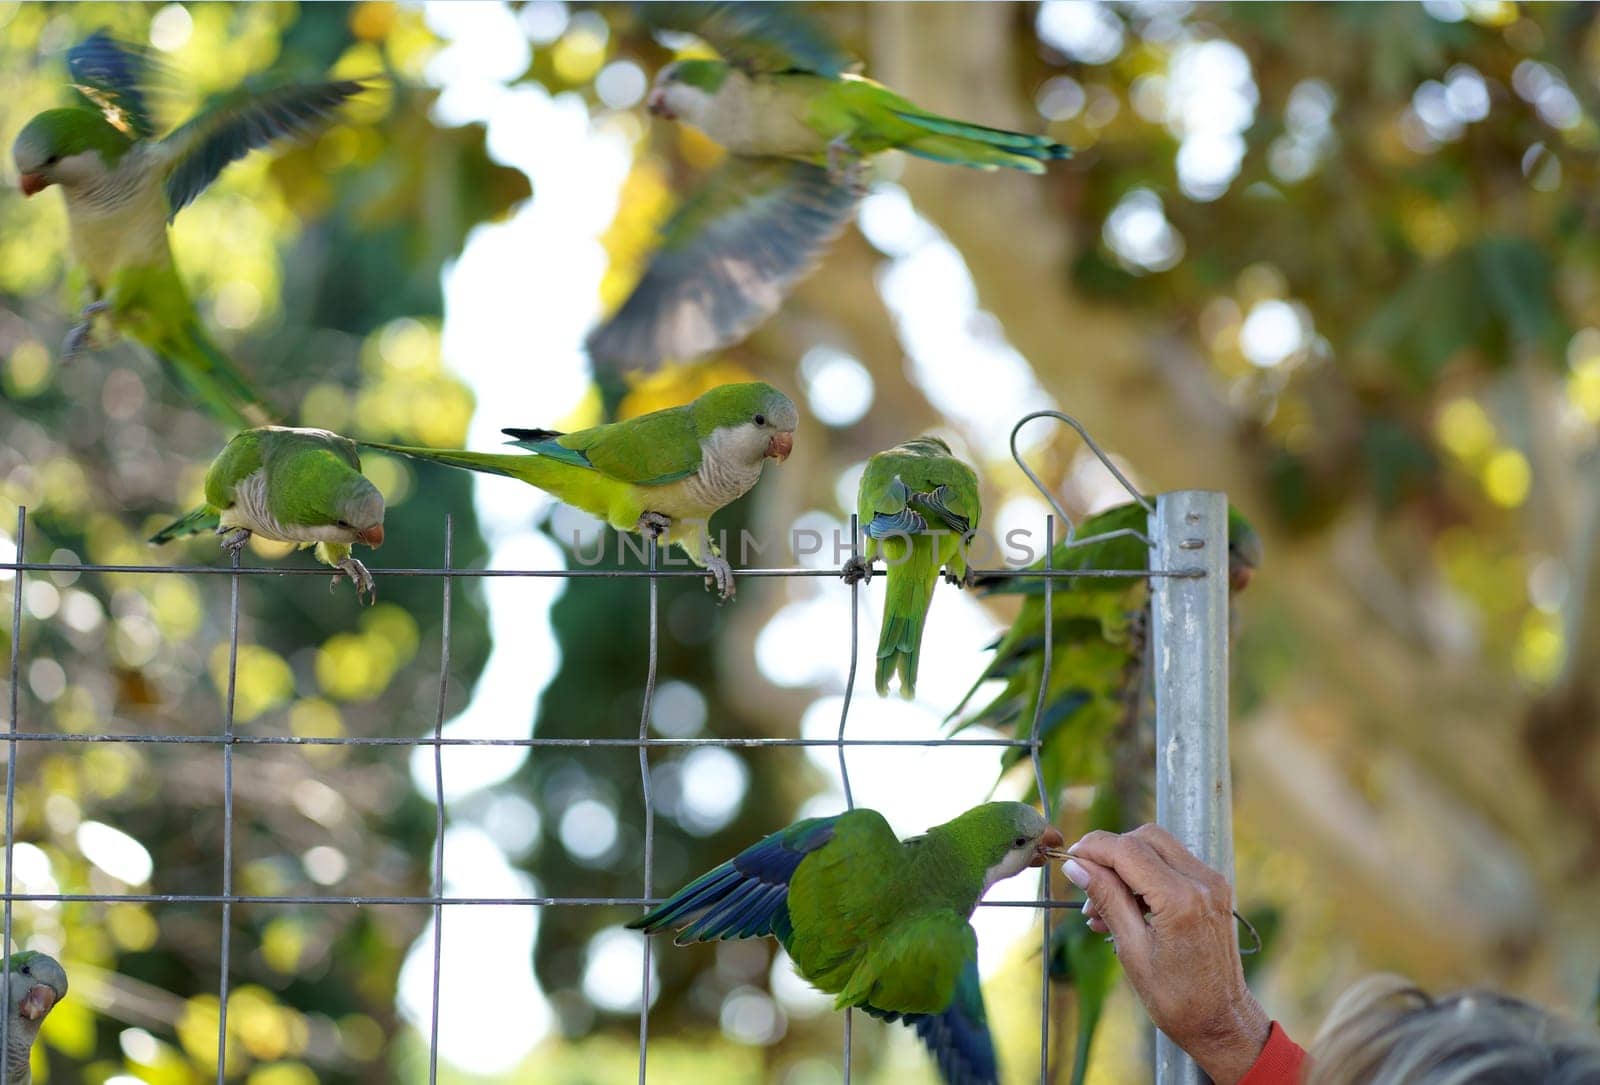 Barcelona. City Park. People feed parrots. Monk parakeet Myiopsitta monachus , Group of green parakeets on a chain-link fence and the hand of a person feeding them by aprilphoto